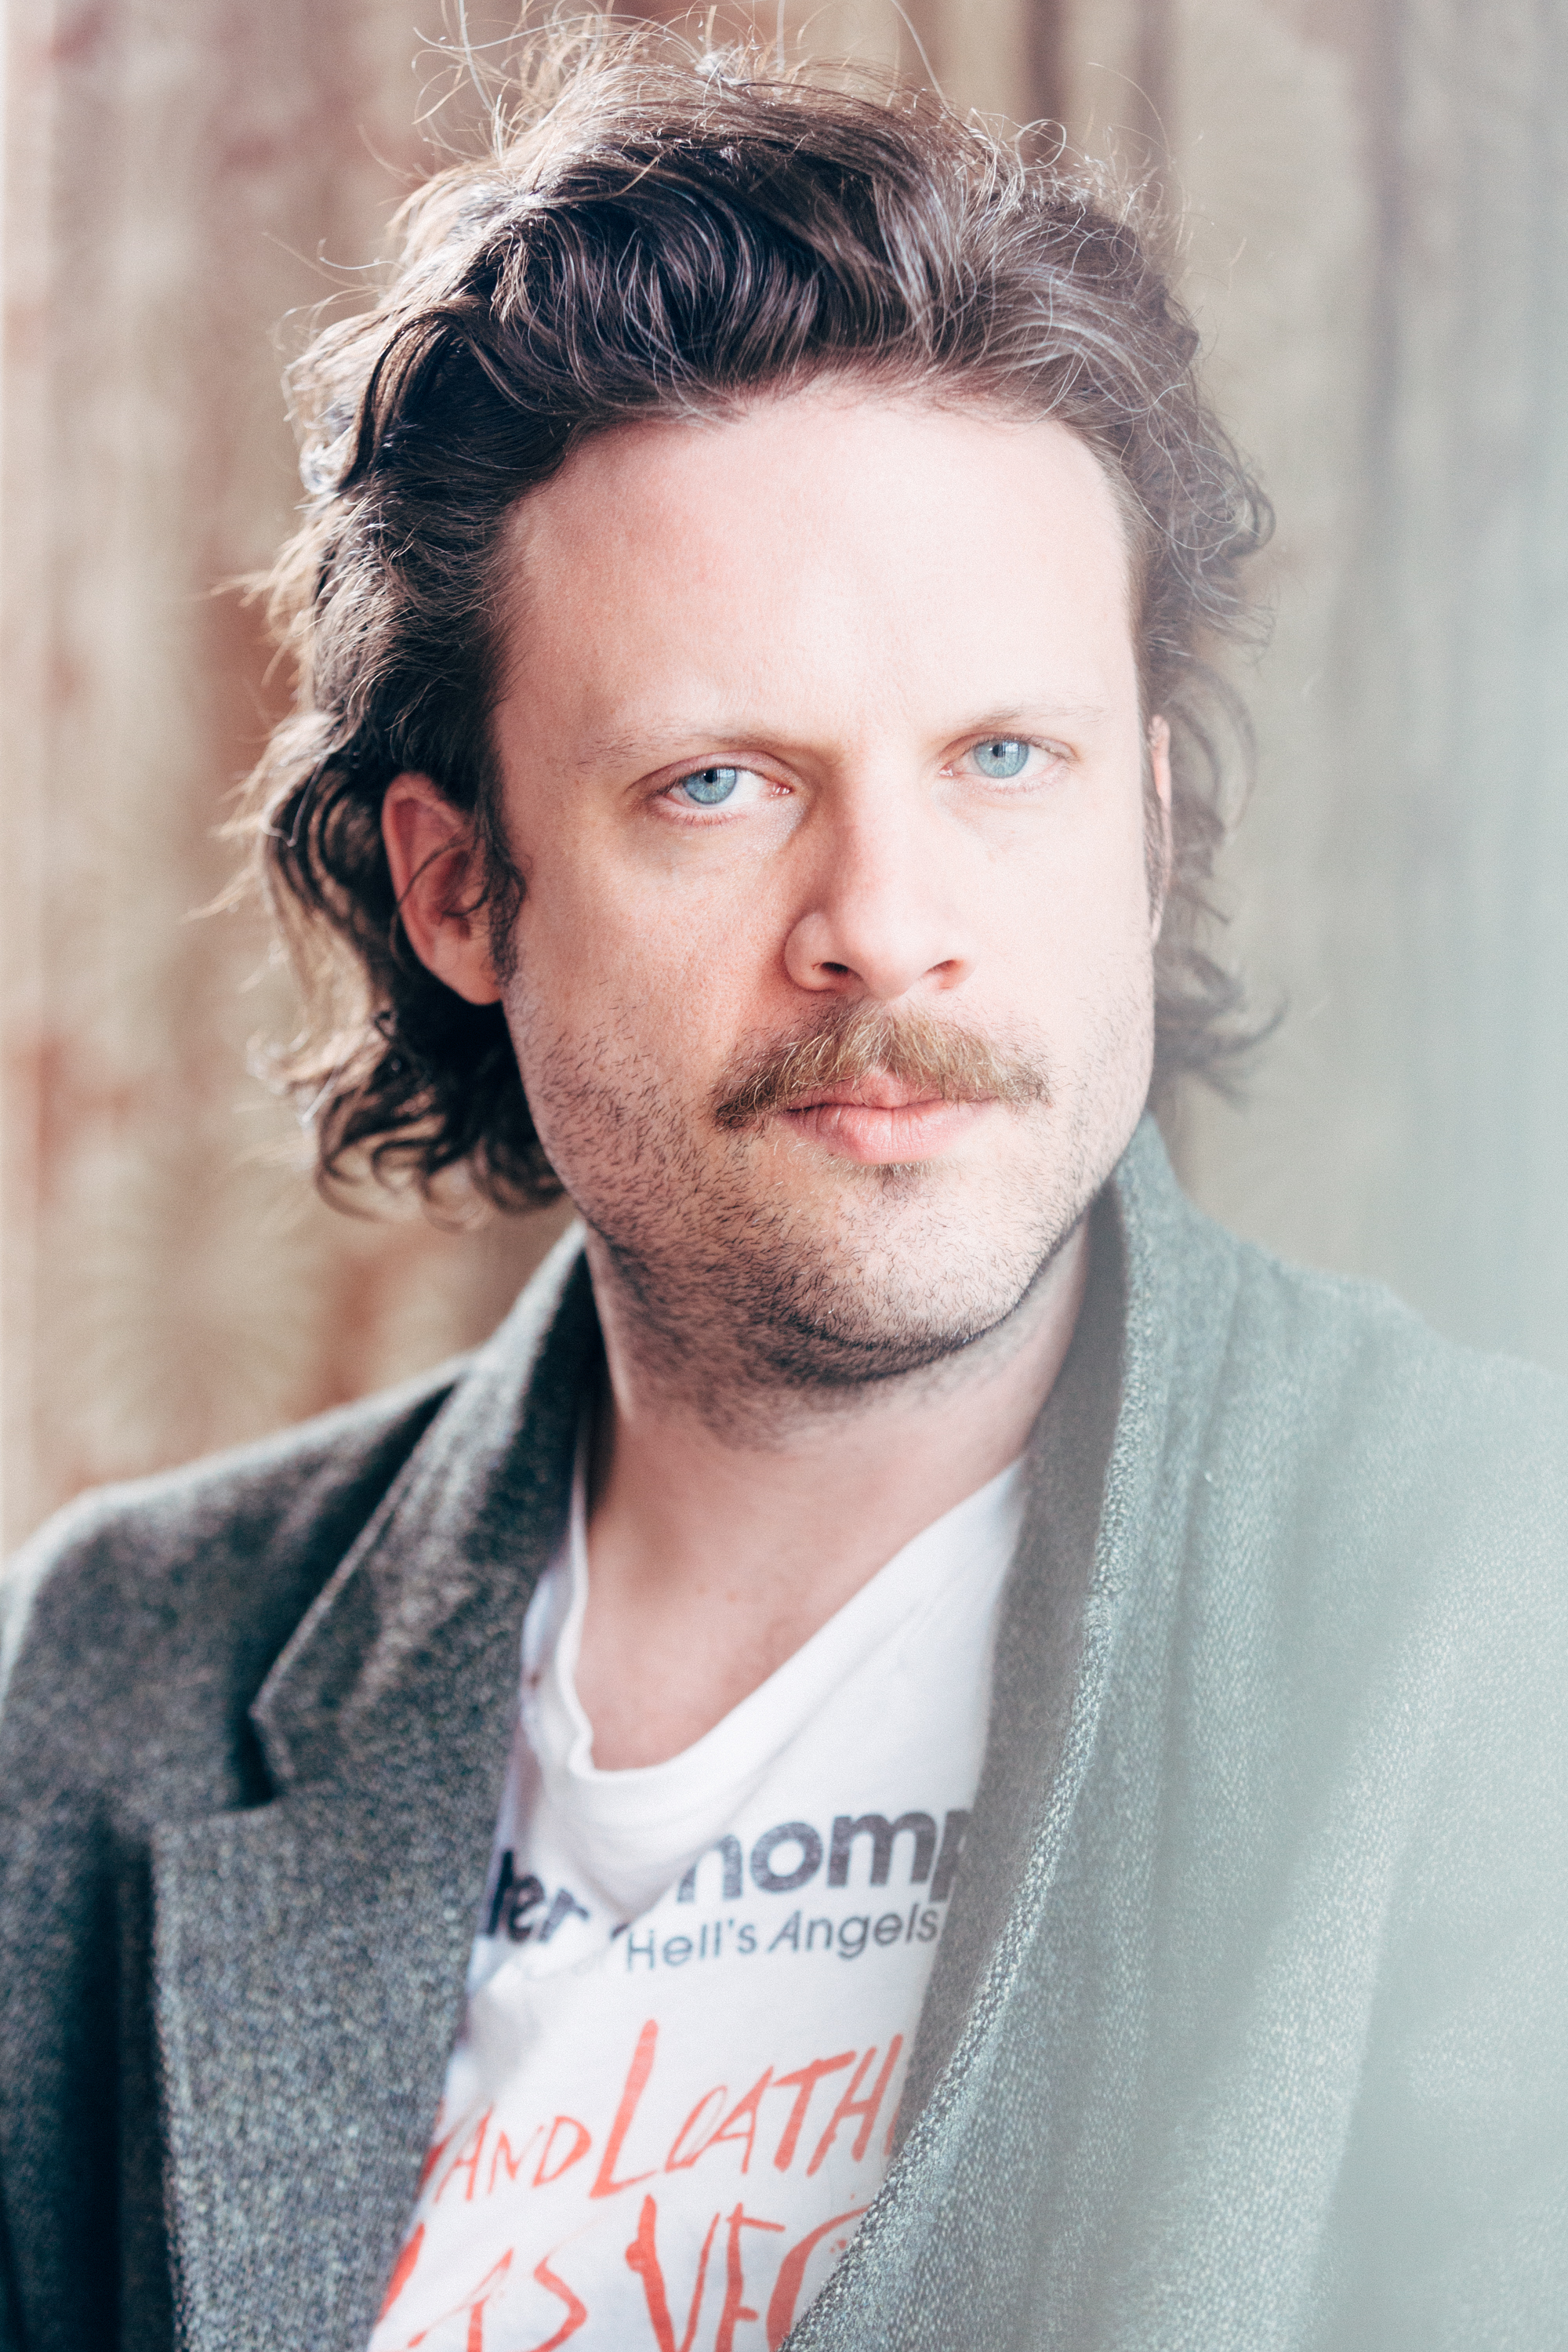 Father John Misty for The New York Times